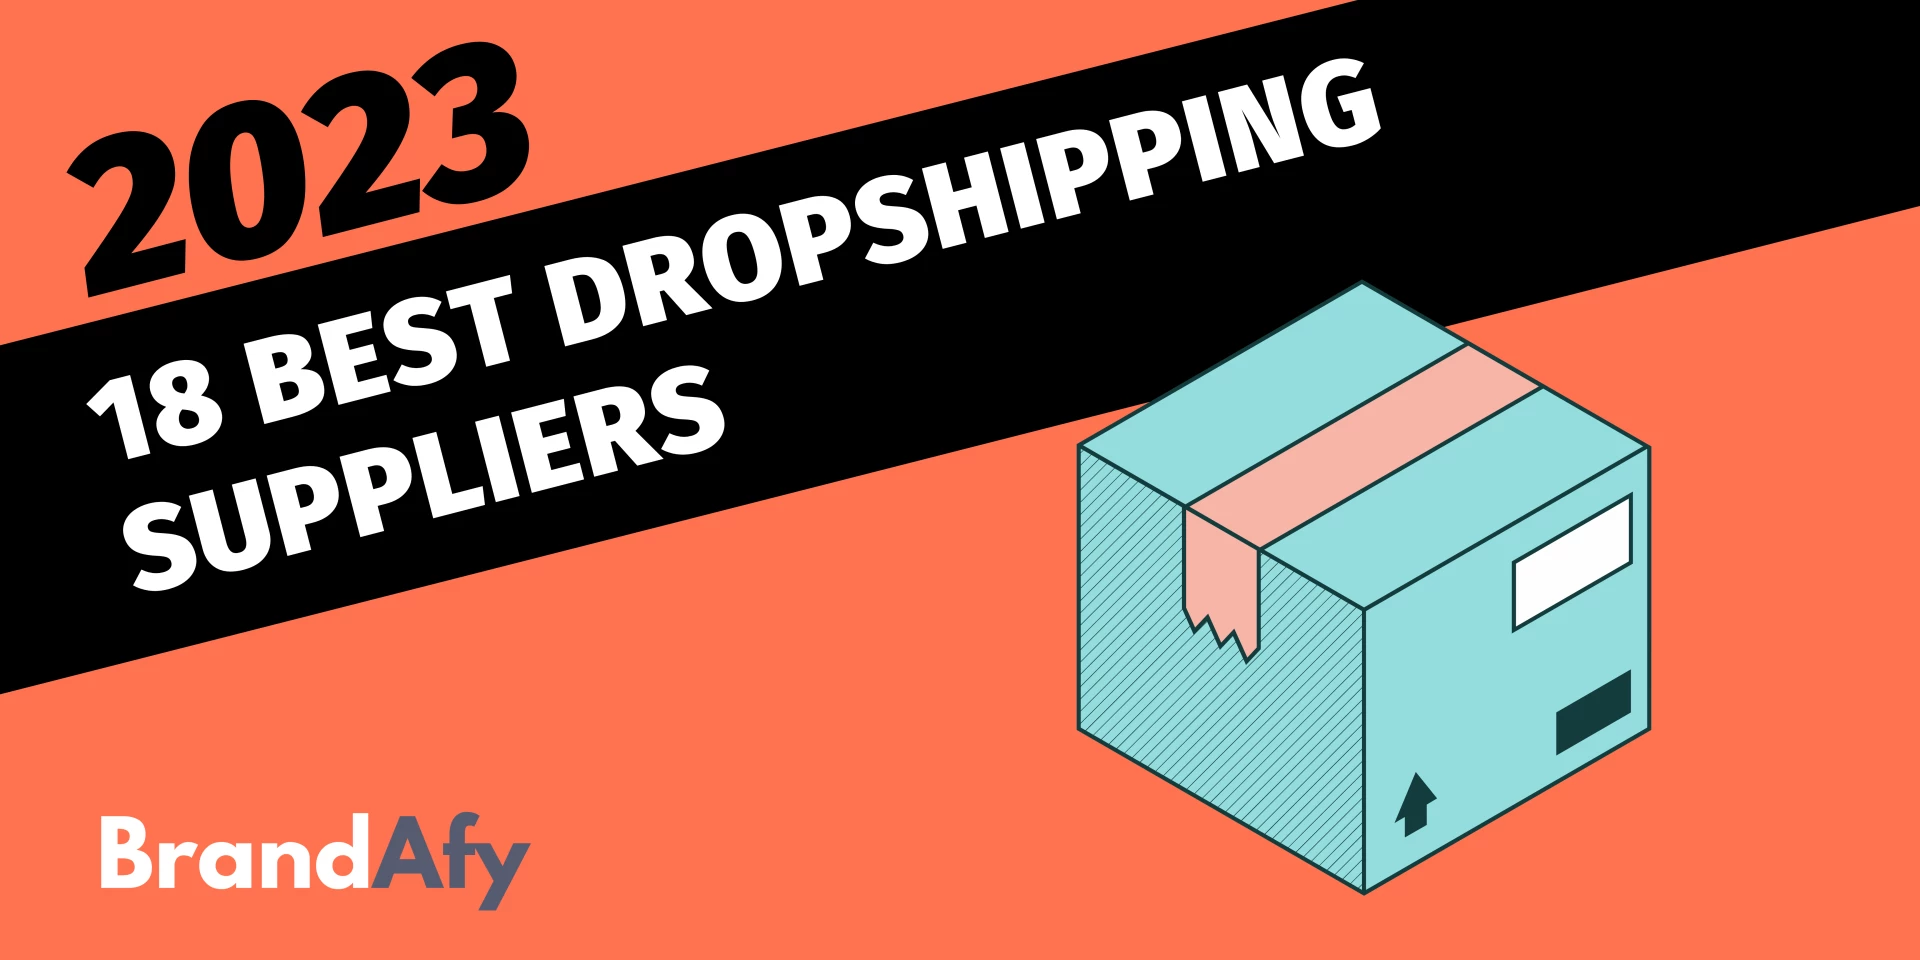 100 Cool Things Under 5 Dollars To Dropship From AliExpress